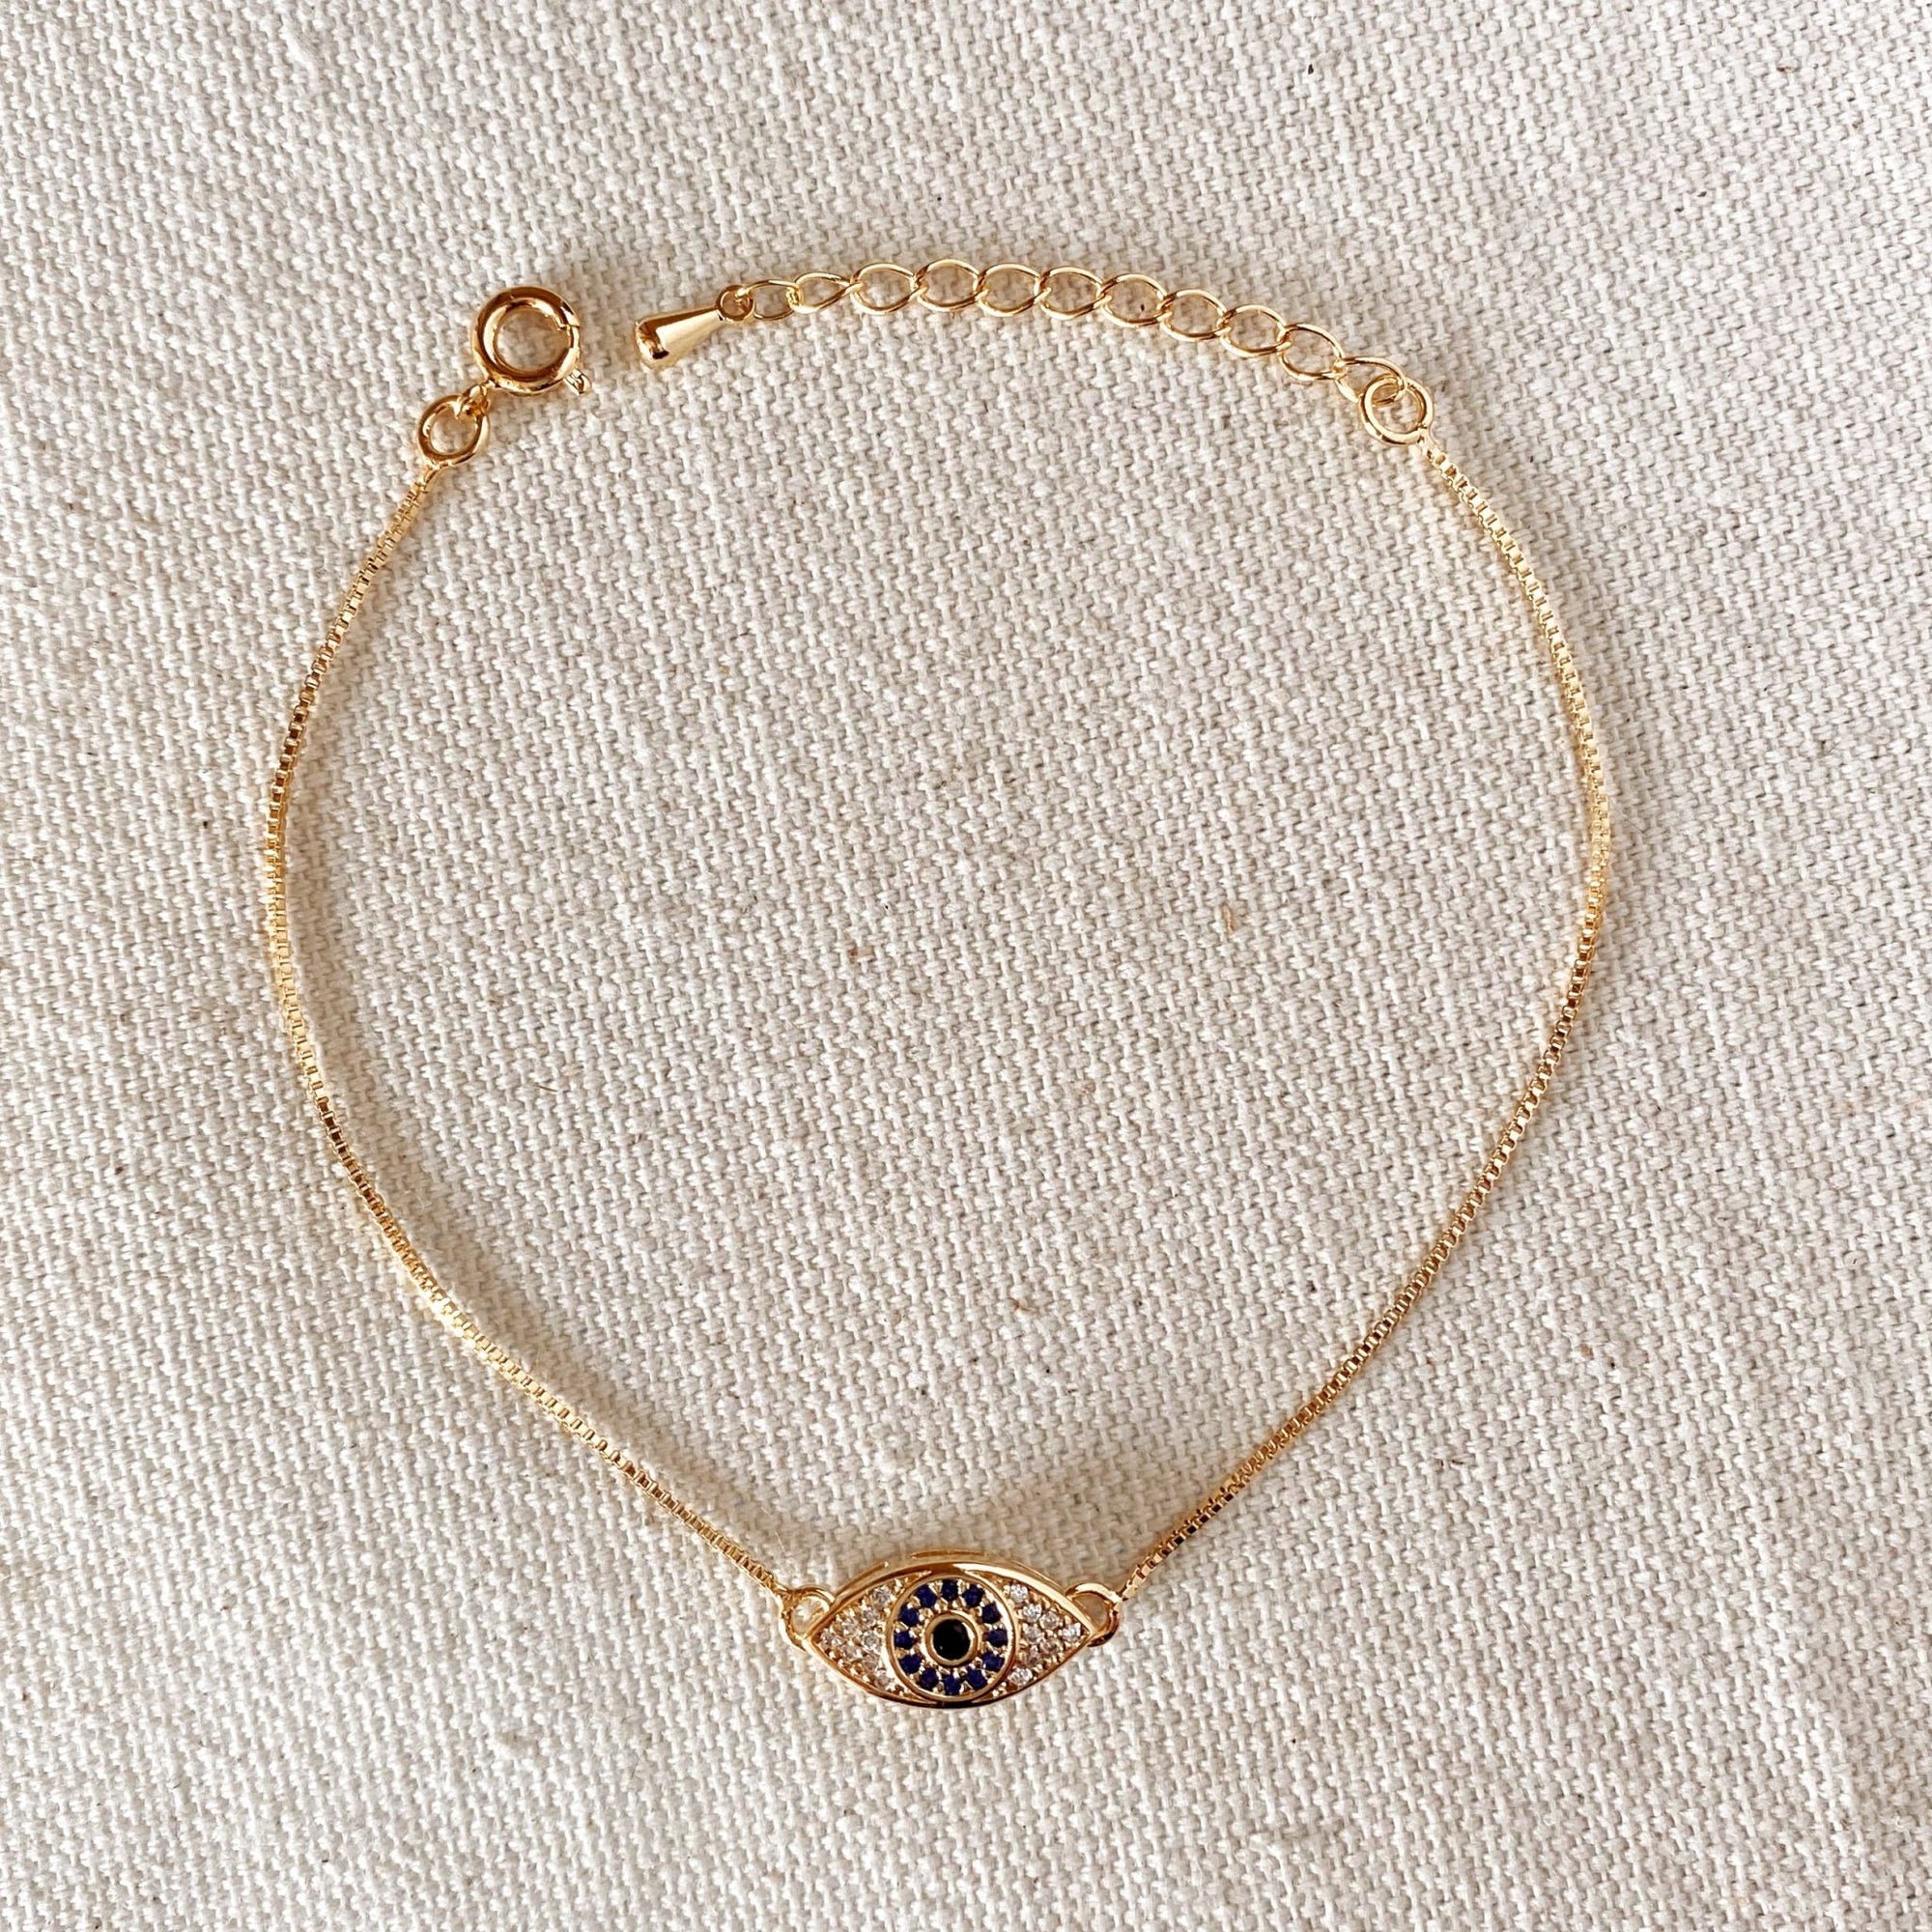 Evil Eye Bracelet Featuring Micro Pave Cubic Zirconia Sapphire And Clear CZ by Abigail Fox, 18k Gold Filled - Abigail Fox Designs